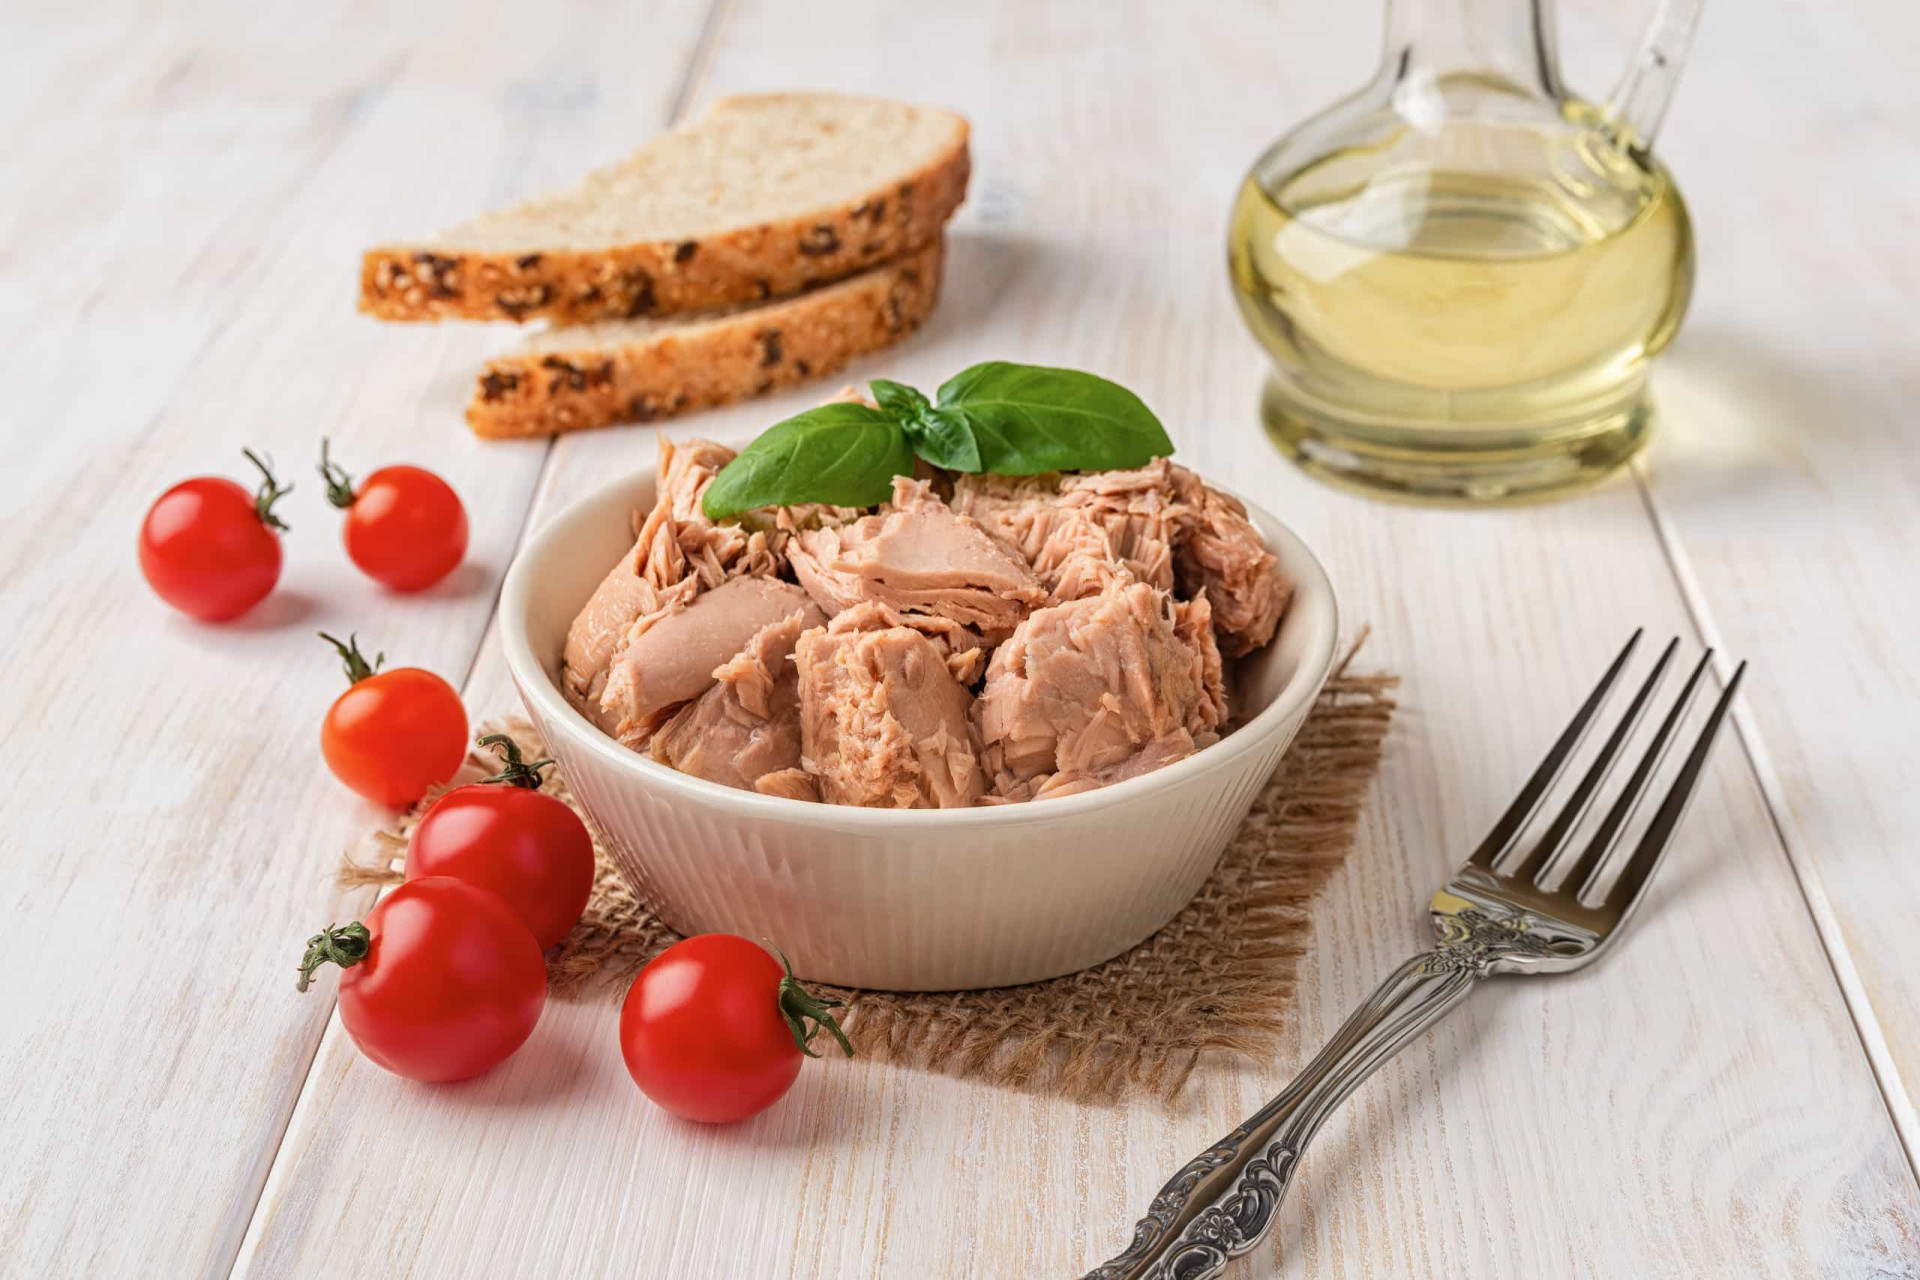 <p>Excessive consumption of tuna can adversely affect your health, despite its delectable taste and nutritional value. Why?</p><p><a href="https://www.msn.com/en-us/community/channel/vid-7xx8mnucu55yw63we9va2gwr7uihbxwc68fxqp25x6tg4ftibpra?cvid=94631541bc0f4f89bfd59158d696ad7e">Follow us and access great exclusive content every day</a></p>